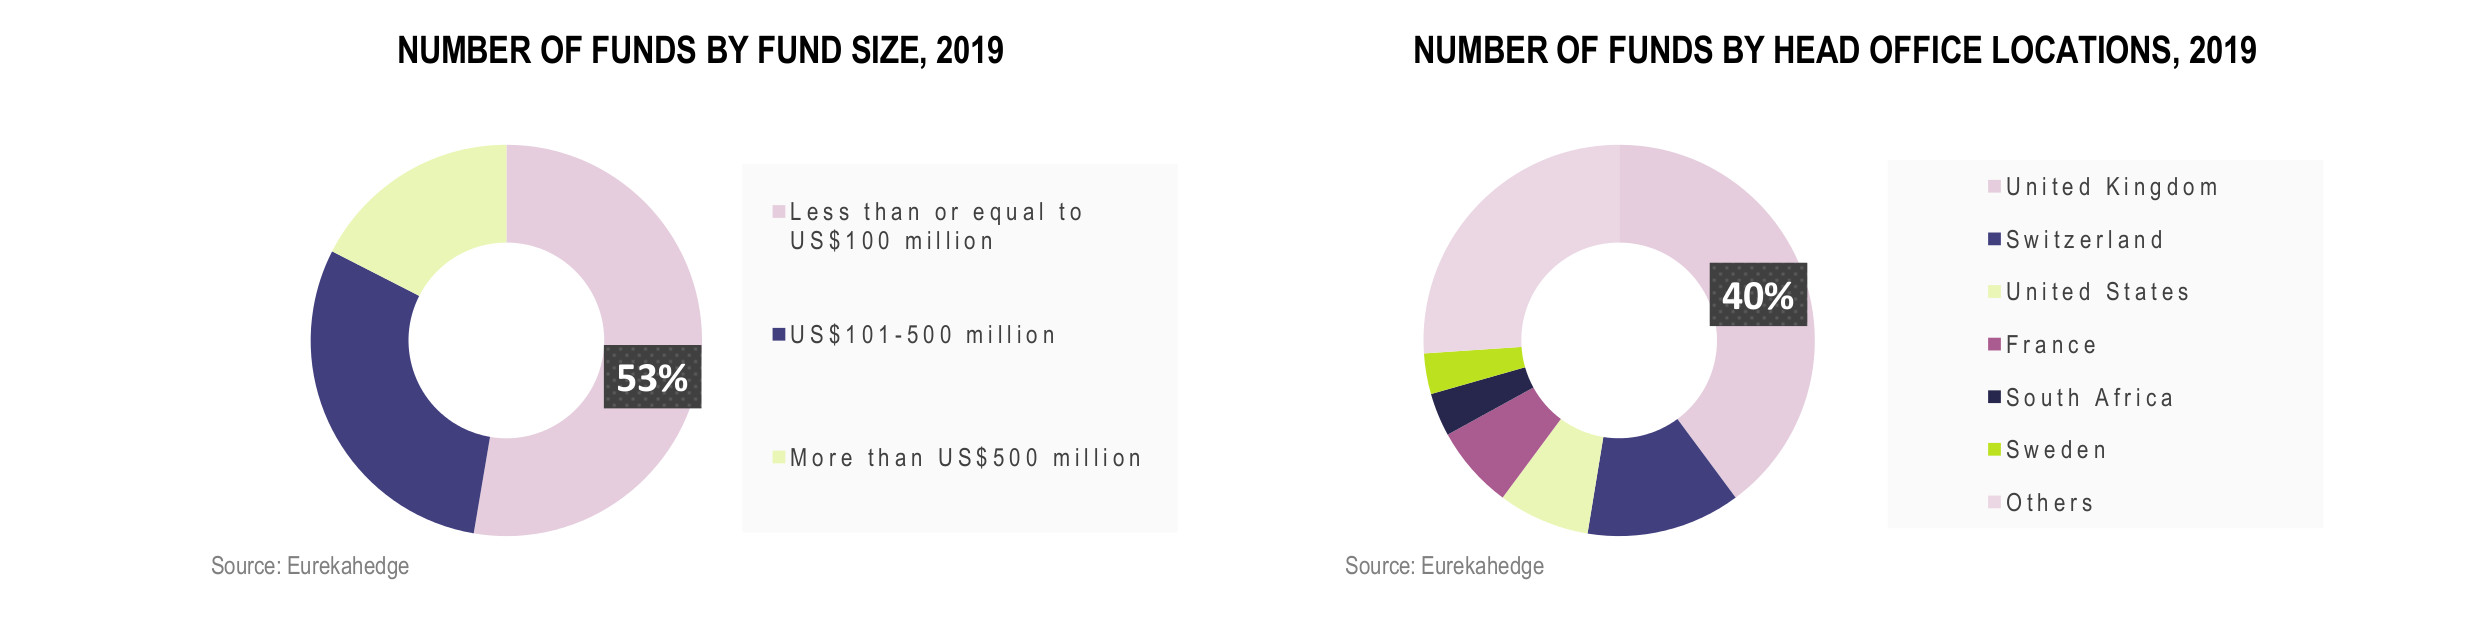 European Hedge Funds Infographic July 2019 - funds by fund size and head office location